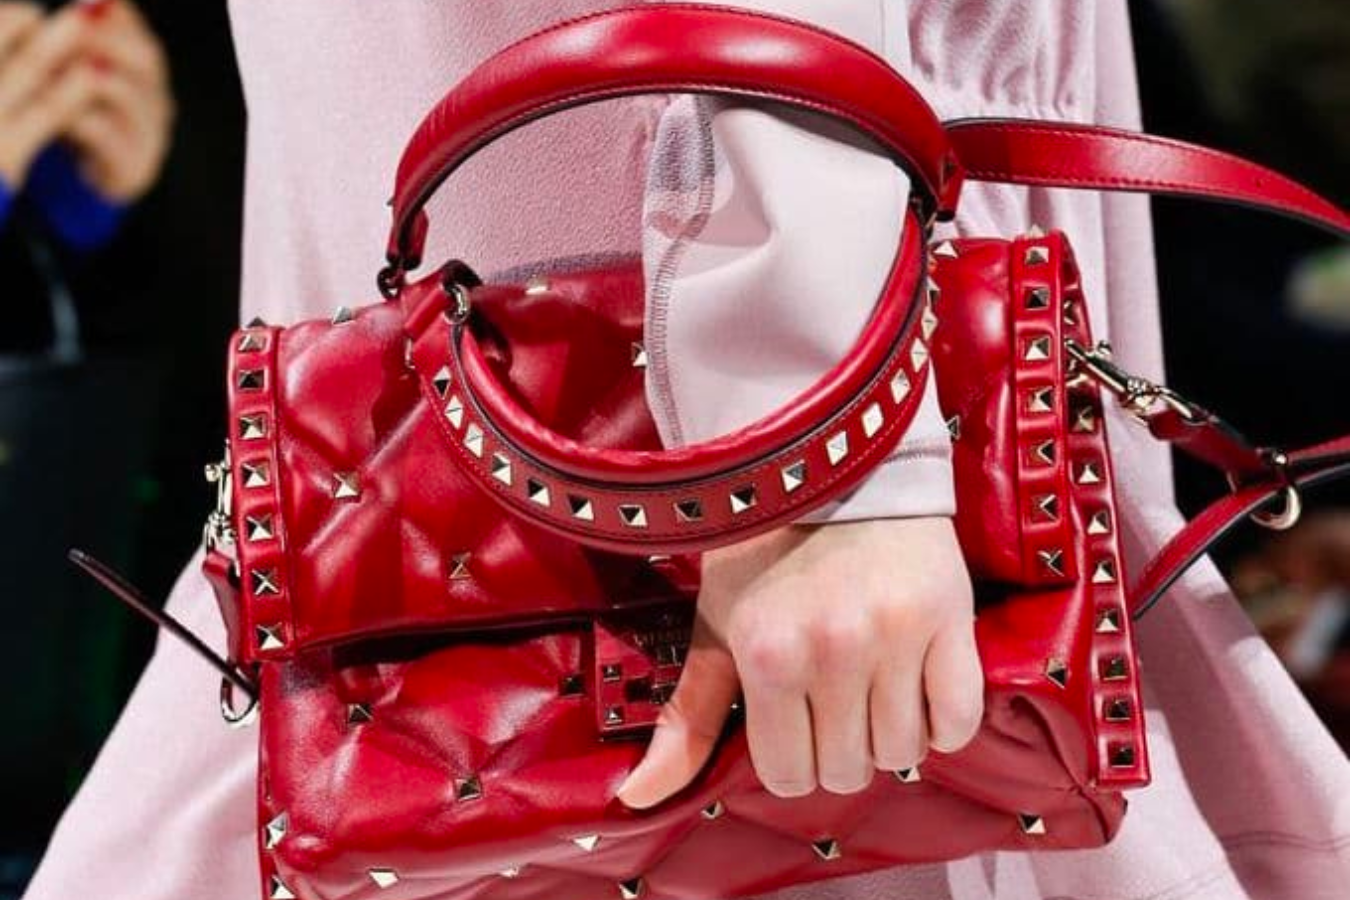 Valentino Candystud Red Quilted Leather